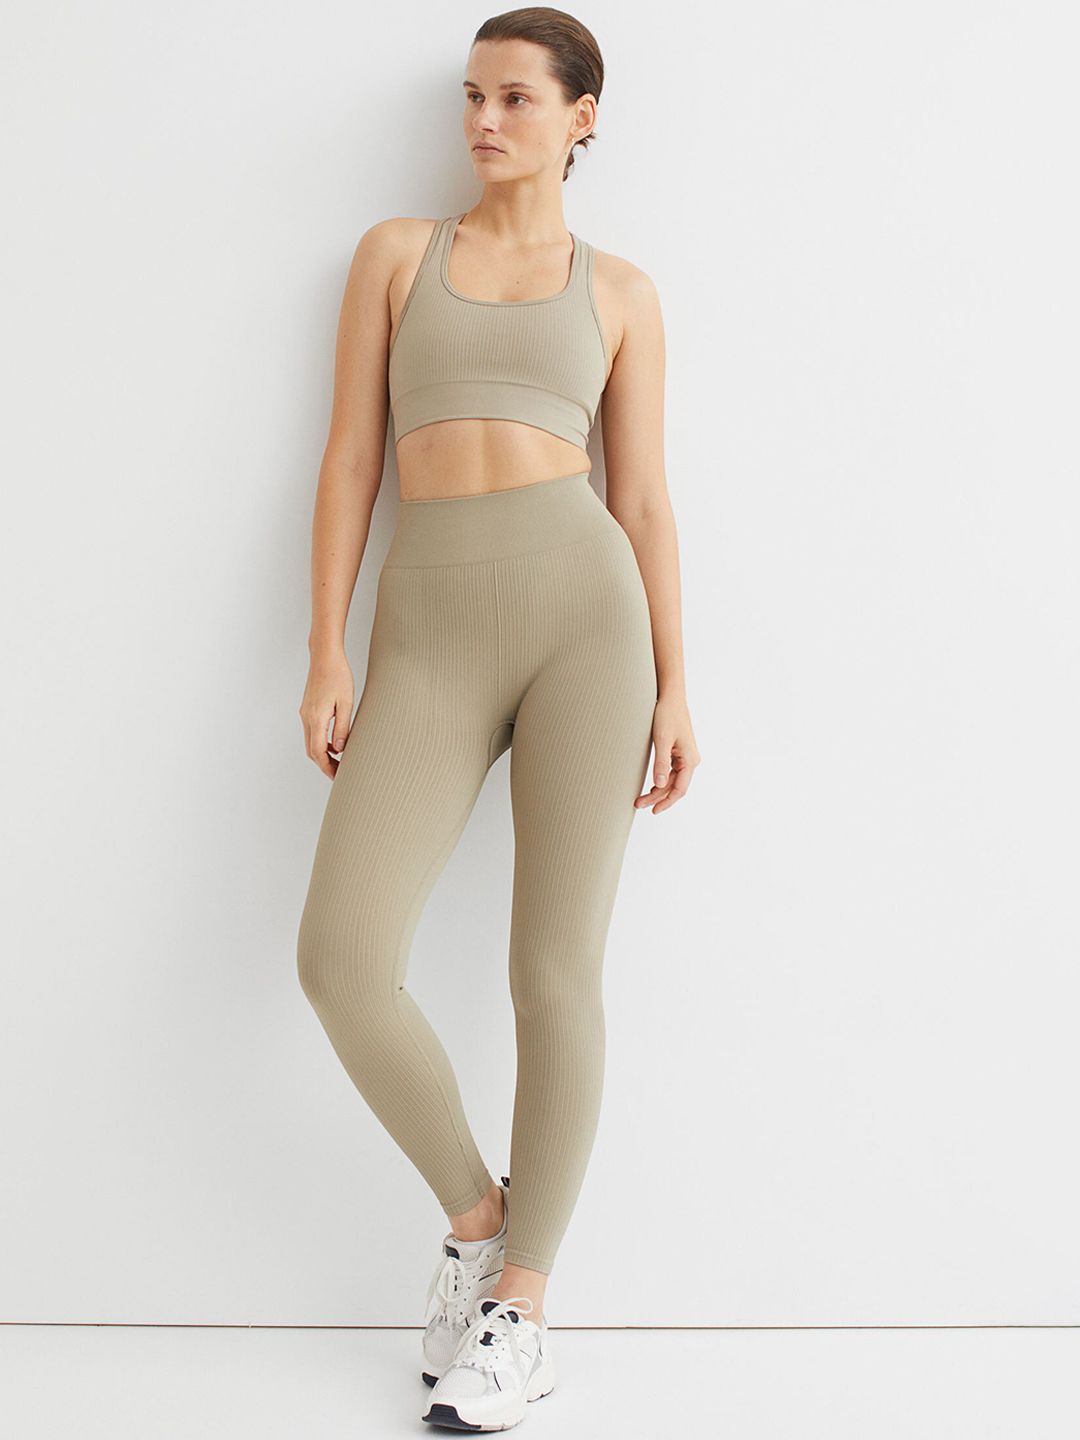 H&M Women Beige Seamless Sports Tights Price in India